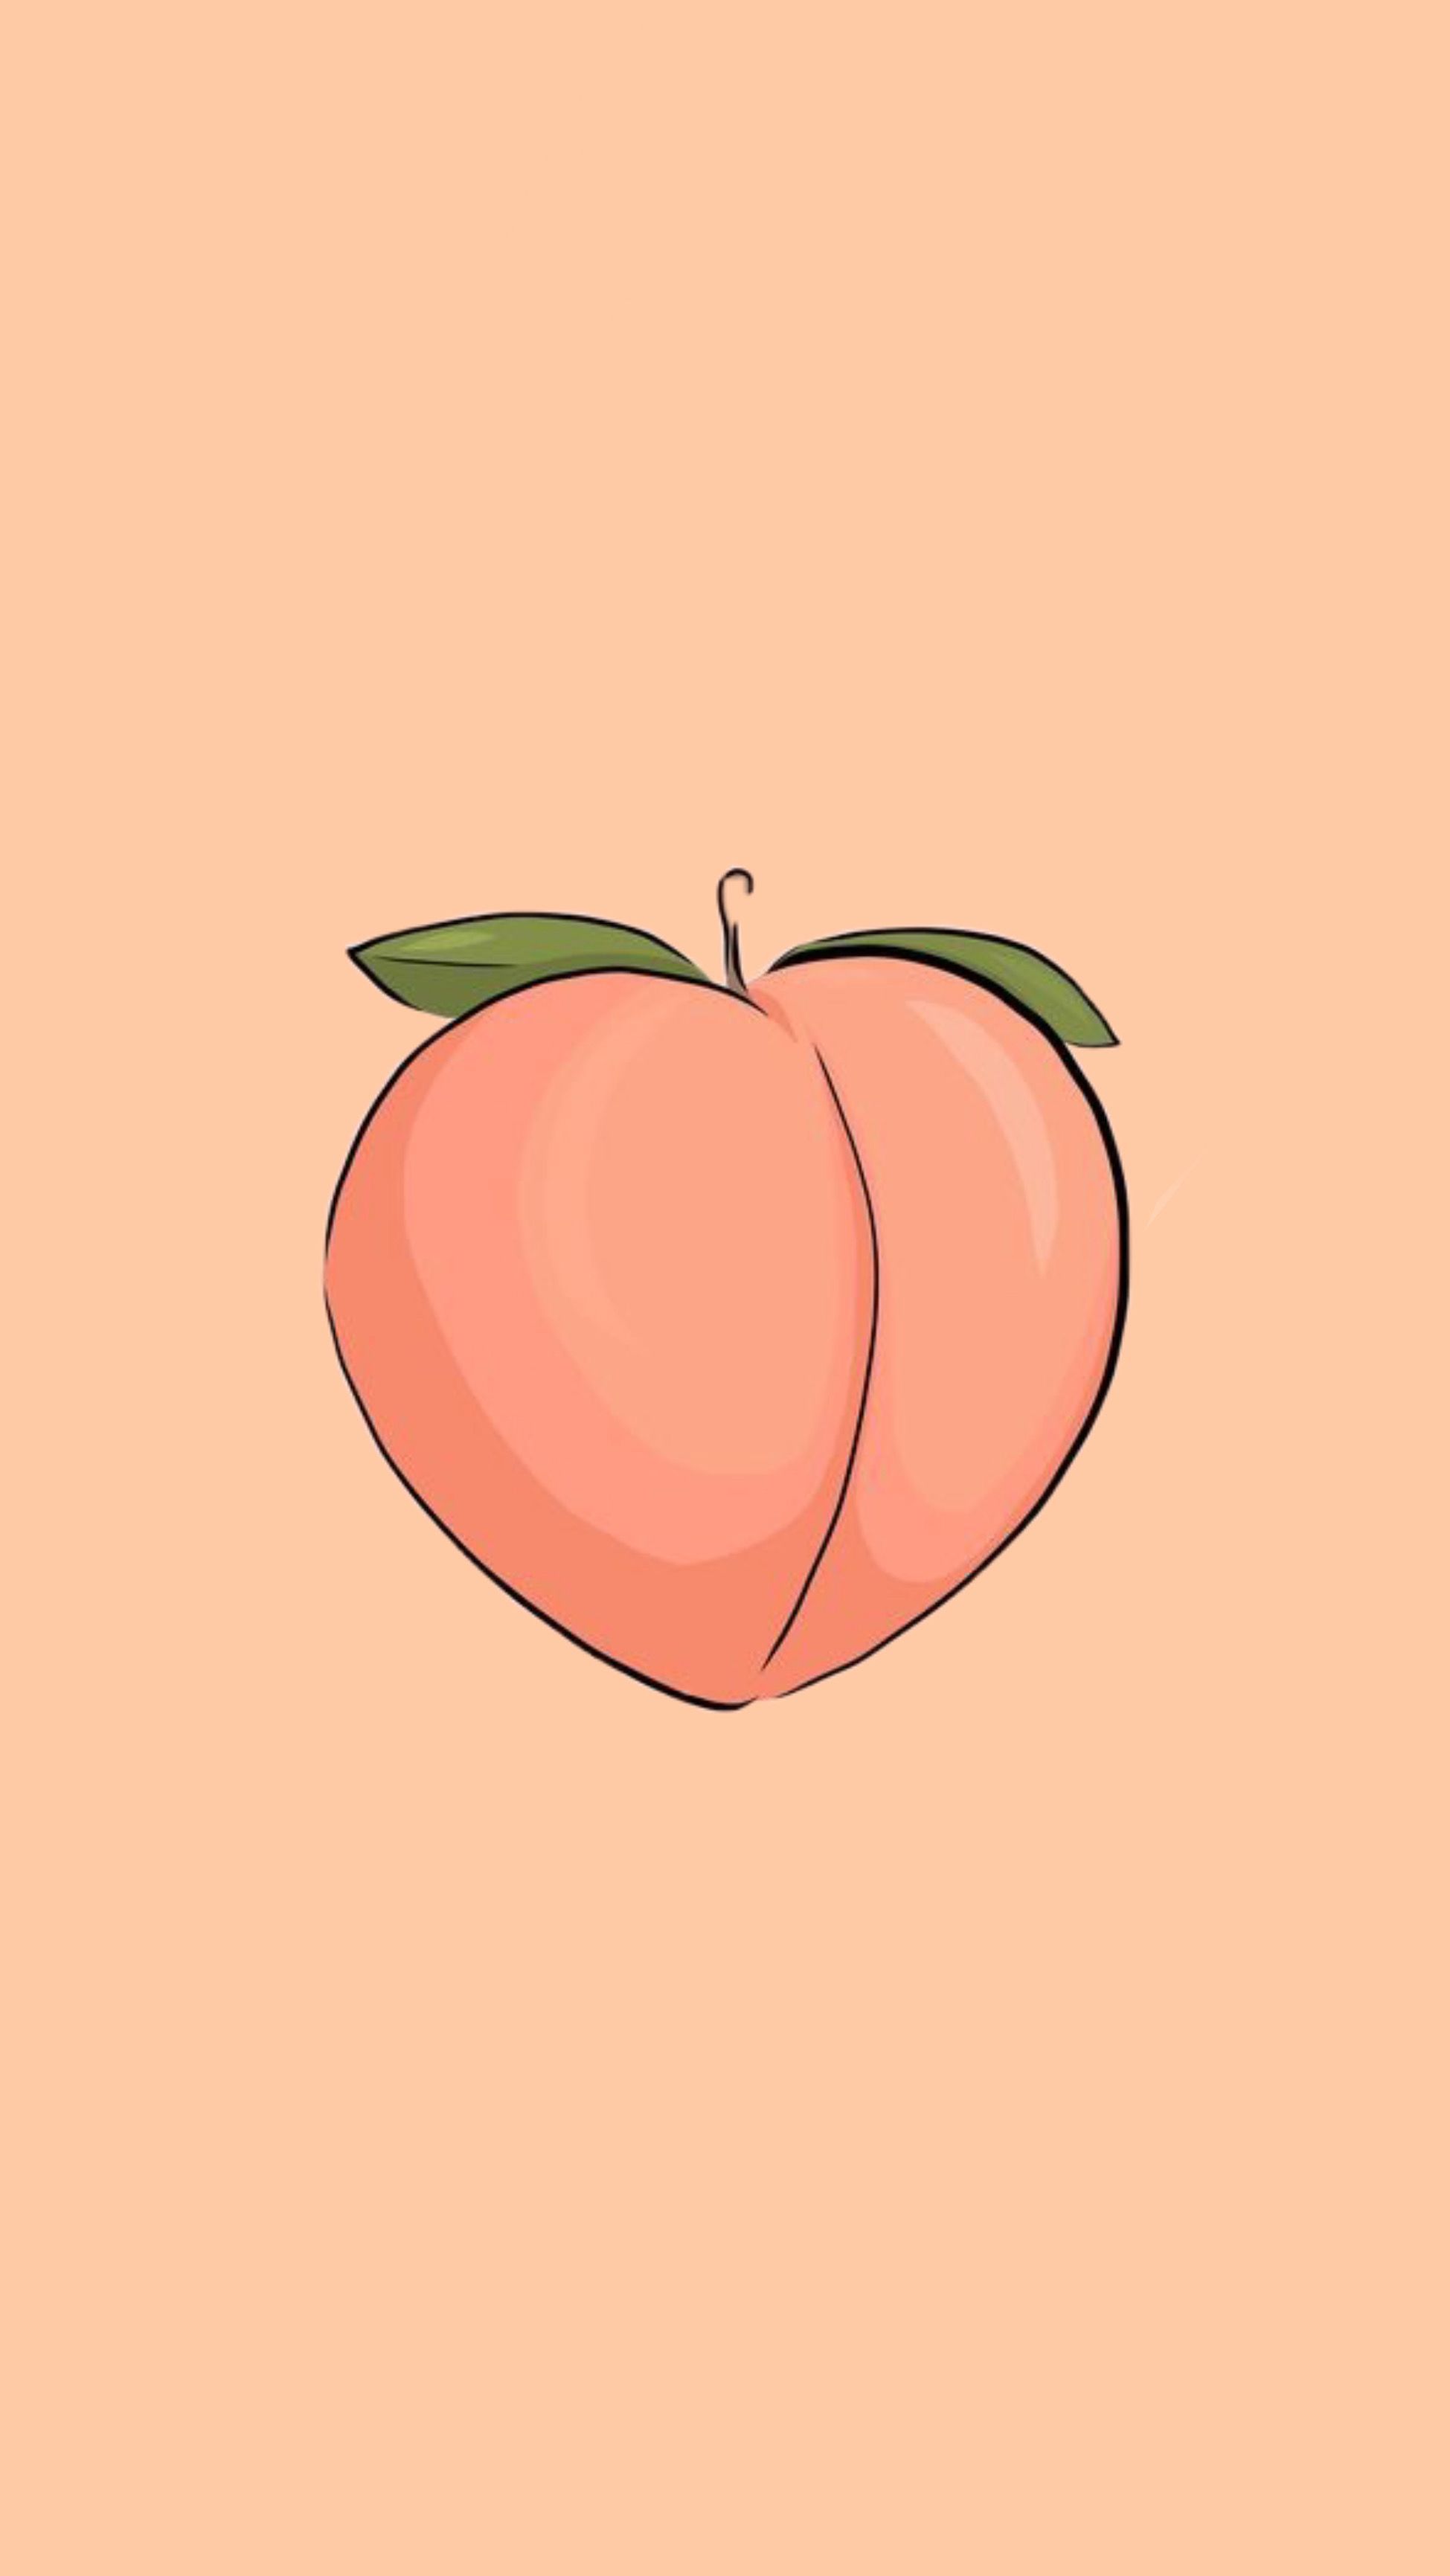 A peach with leaves on it - Peach